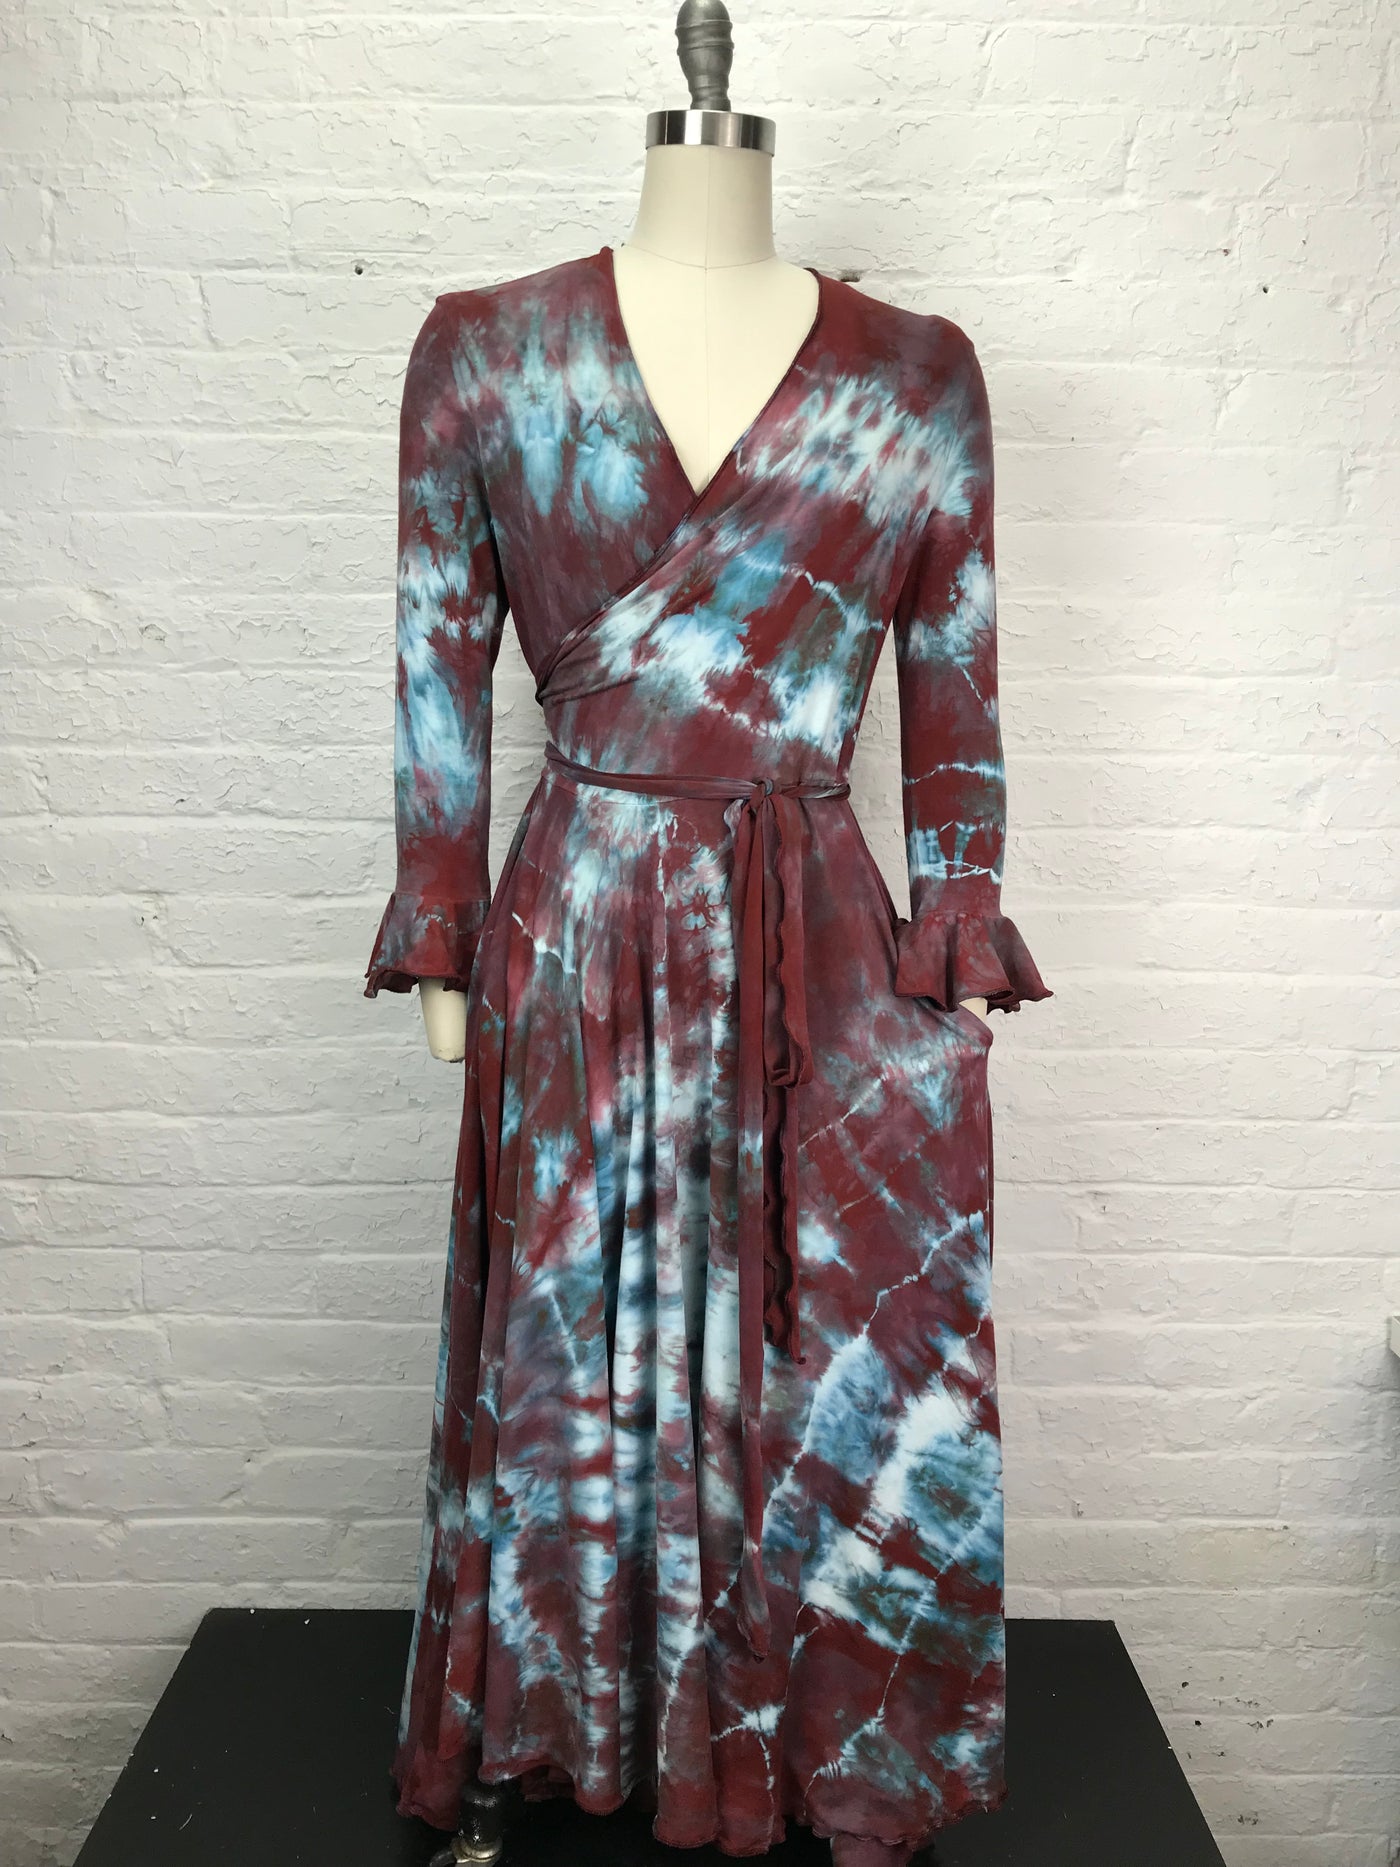 Flamenco Wrap Dress with Pockets in Pinot Noir Tangle